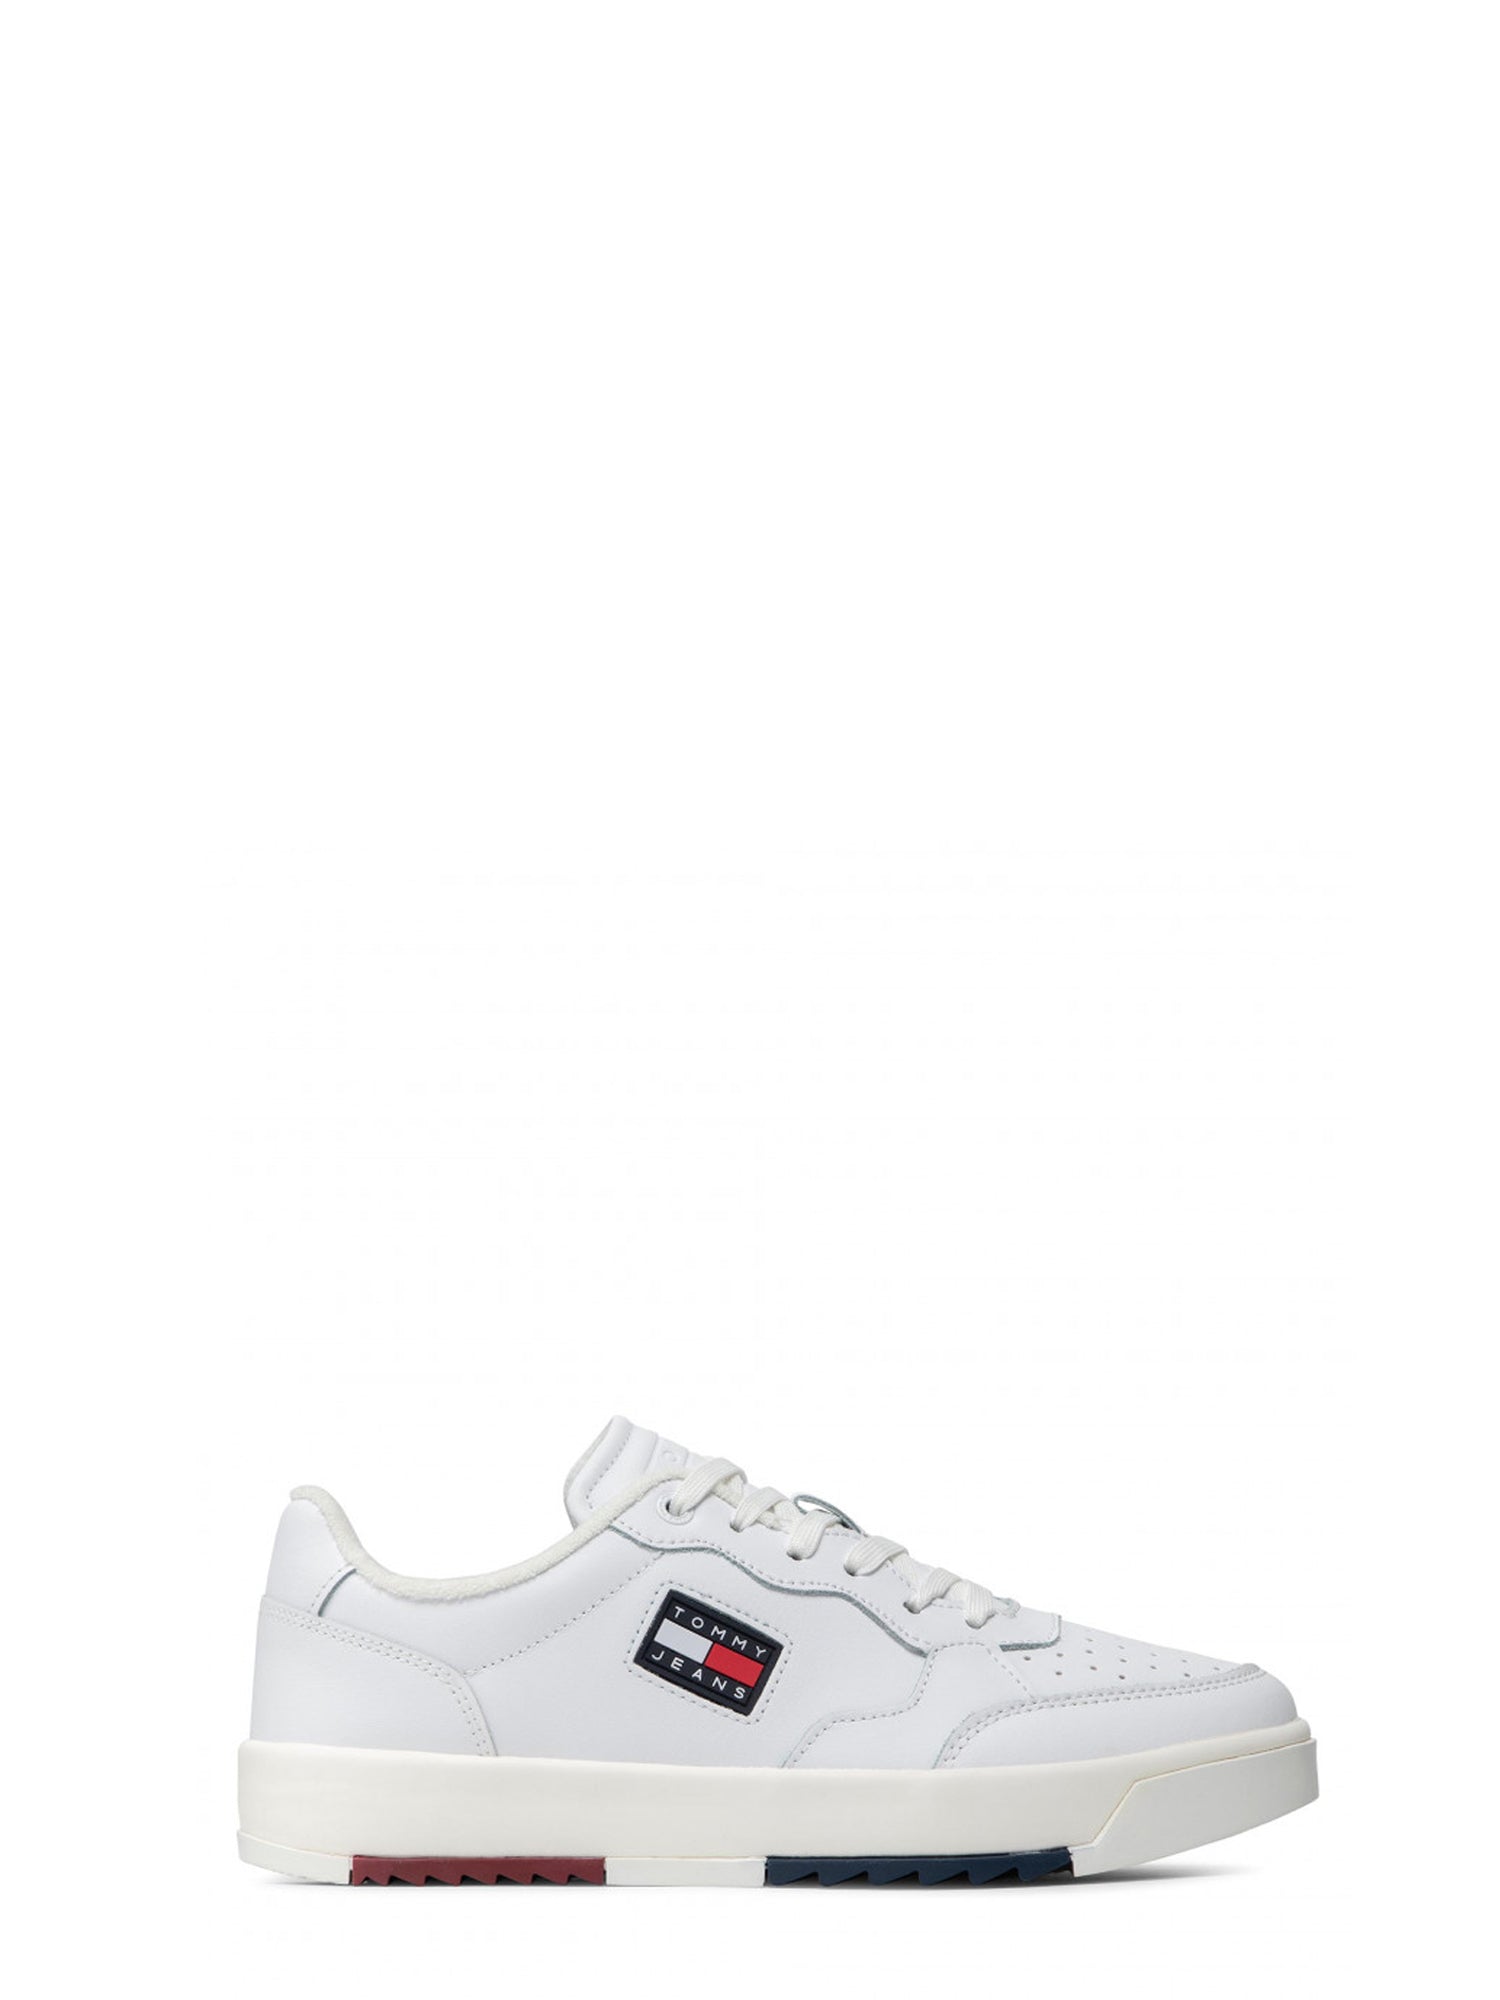 TOMMY HILFIGER SHOES SNEAKERS BASSE BIANCO